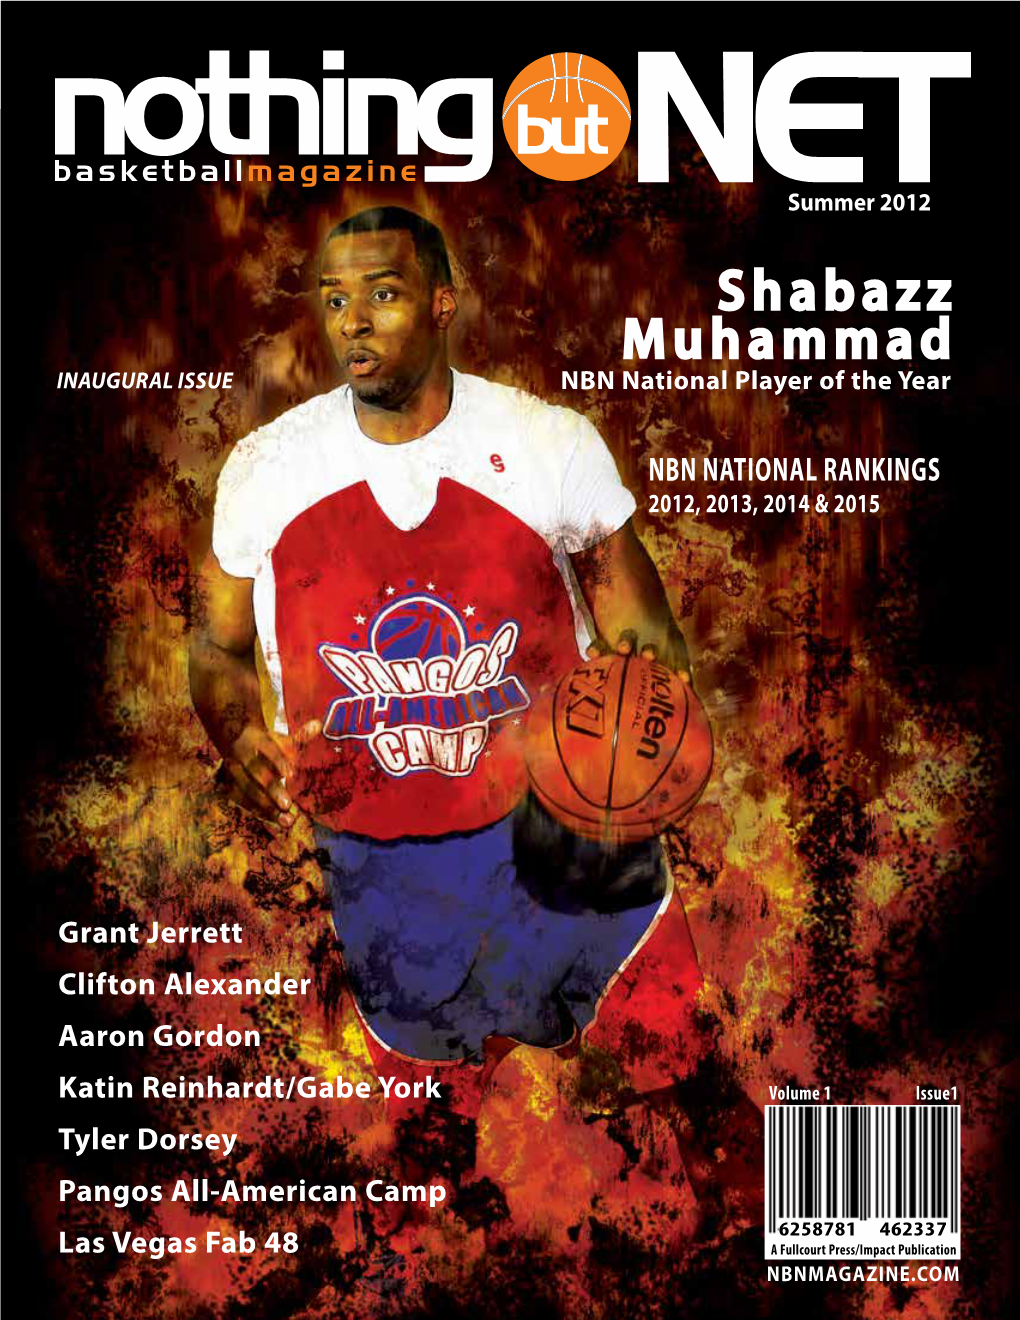 Shabazz Muhammad Inaugural Issue NBN National Player of the Year